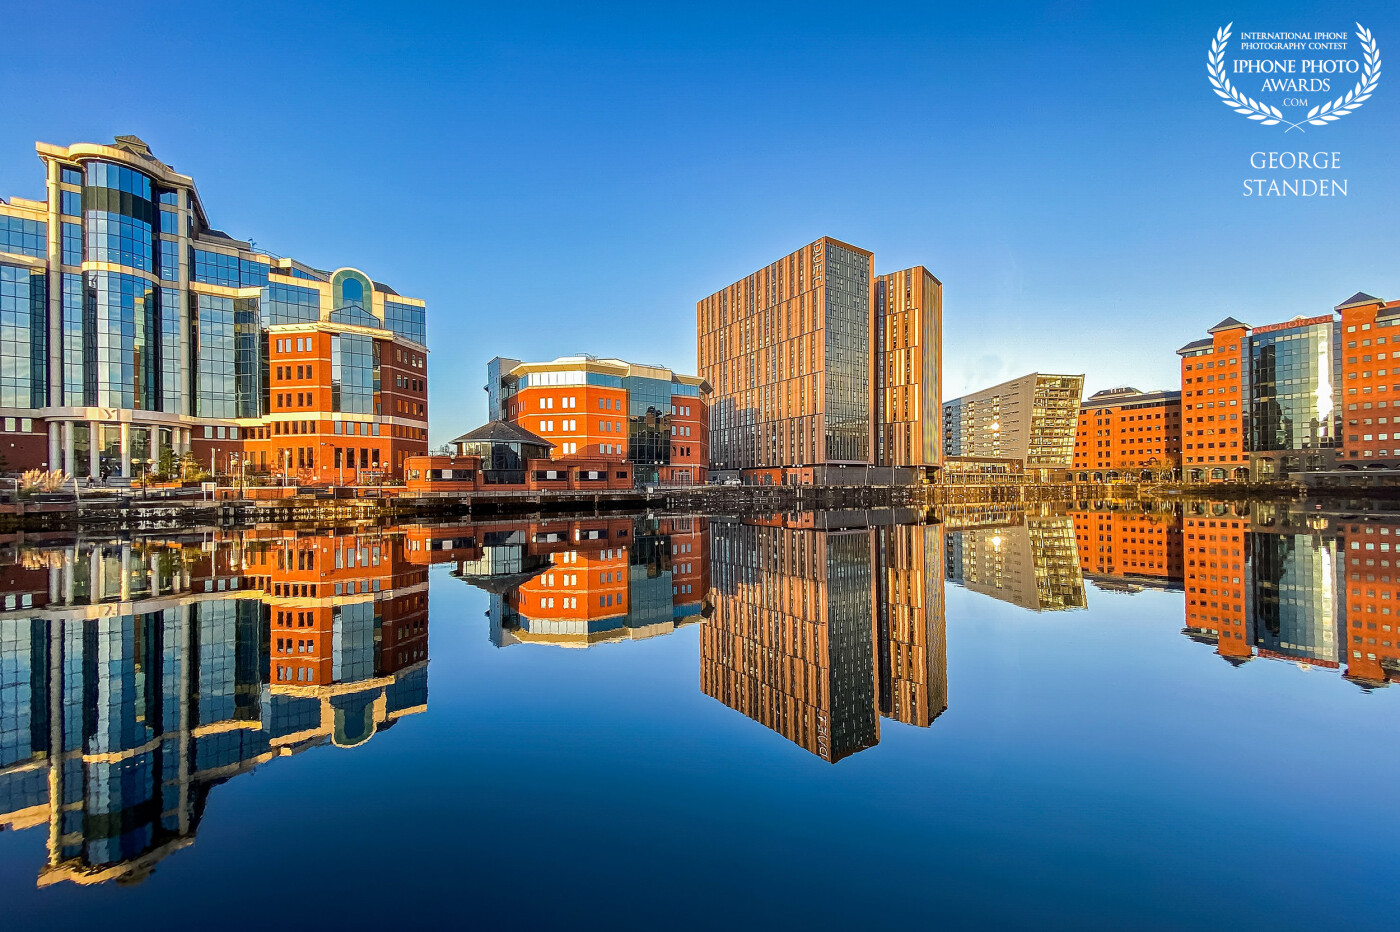 A calm day over Salford Quays, Manchester.  The tall buildings provide a mirror like reflection in the canal.